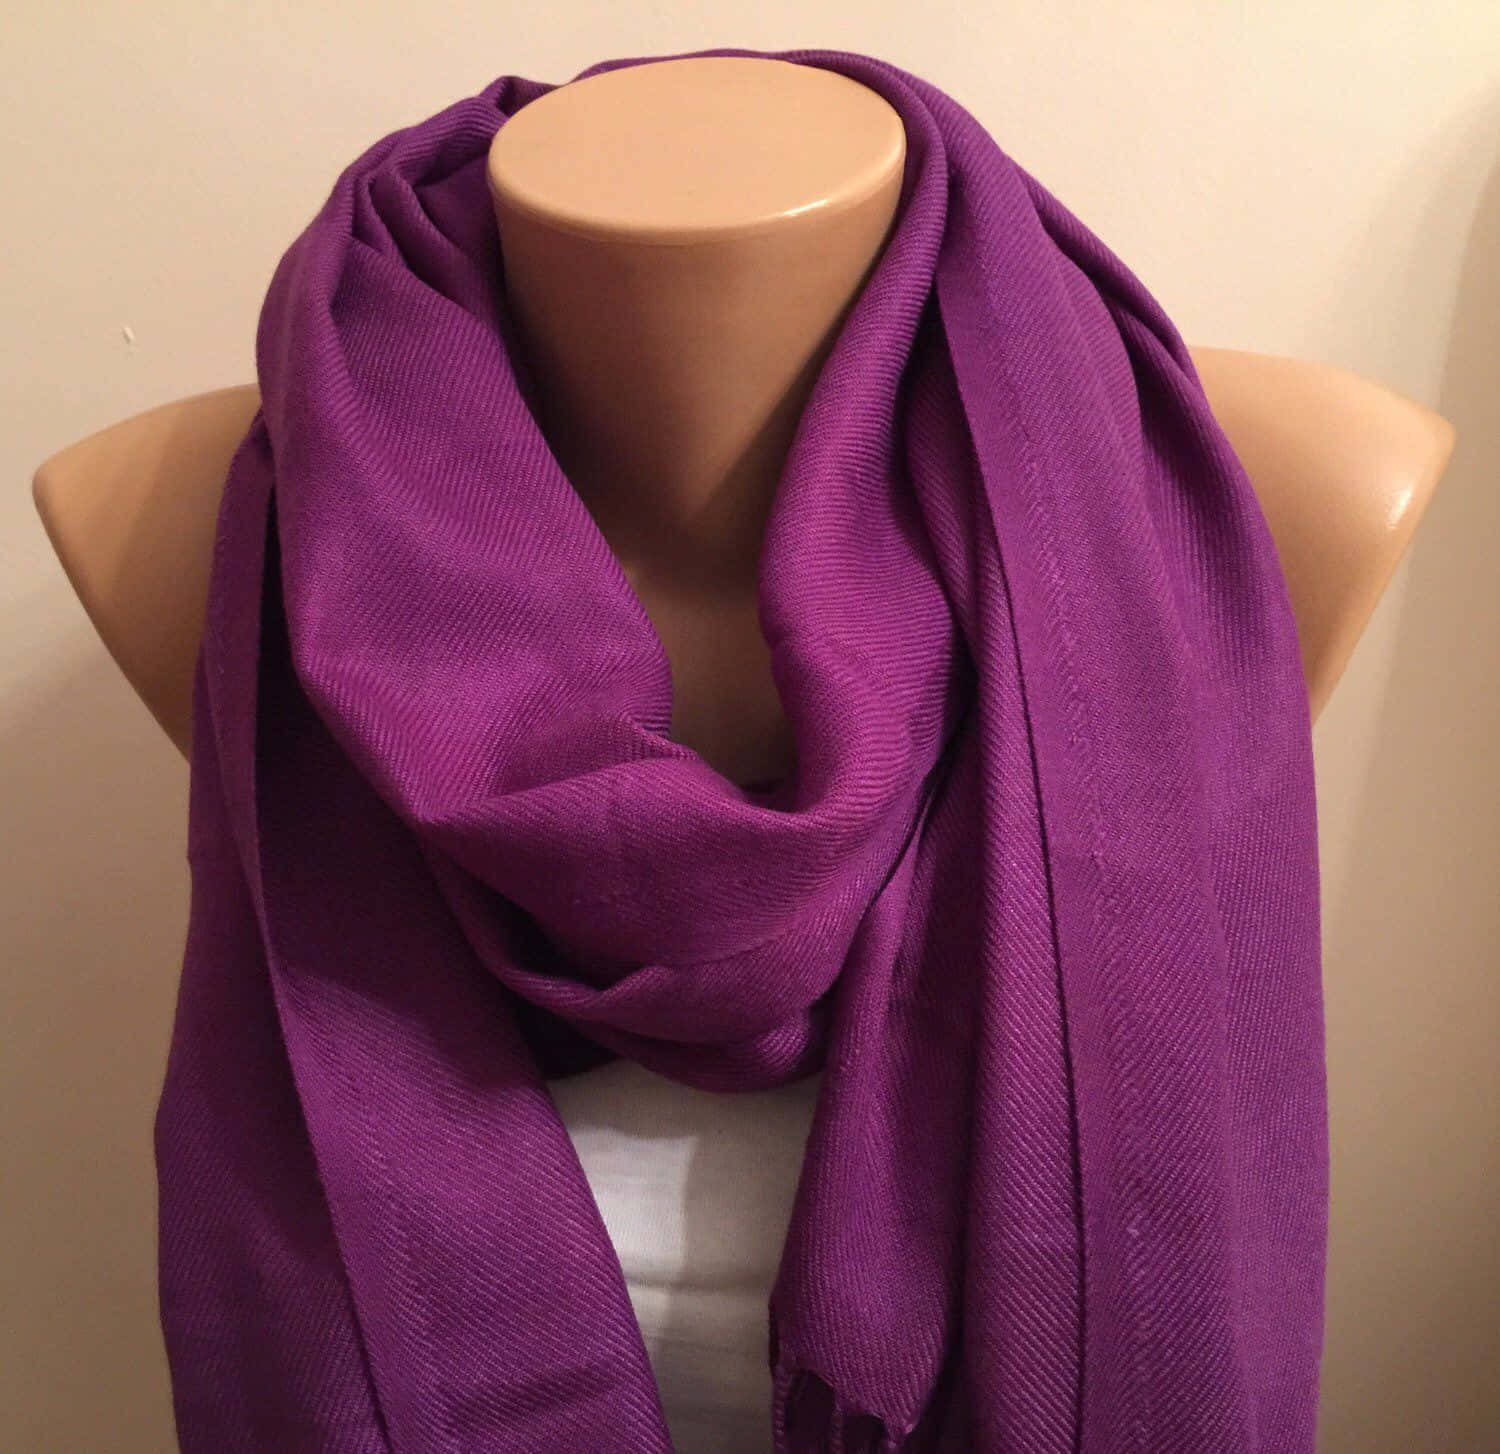 Beautifully patterned purple scarf to add elegance and style to any outfit. Wallpaper